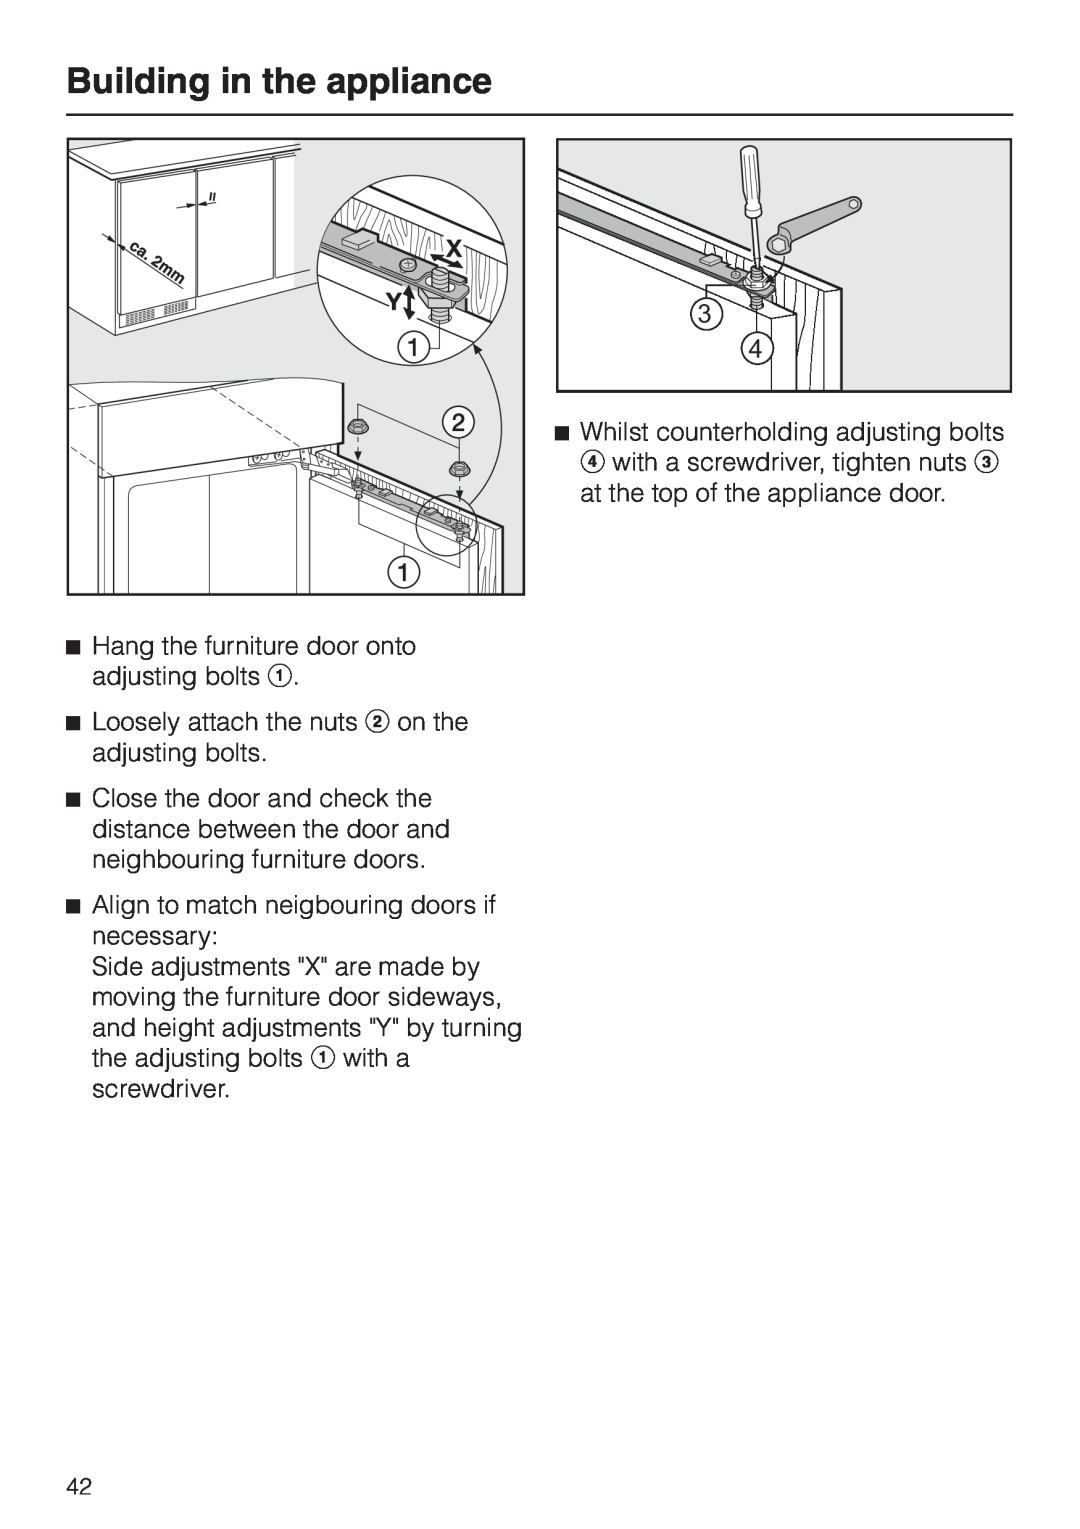 Miele F 456 i-3 installation instructions Building in the appliance, Hang the furniture door onto adjusting bolts a 